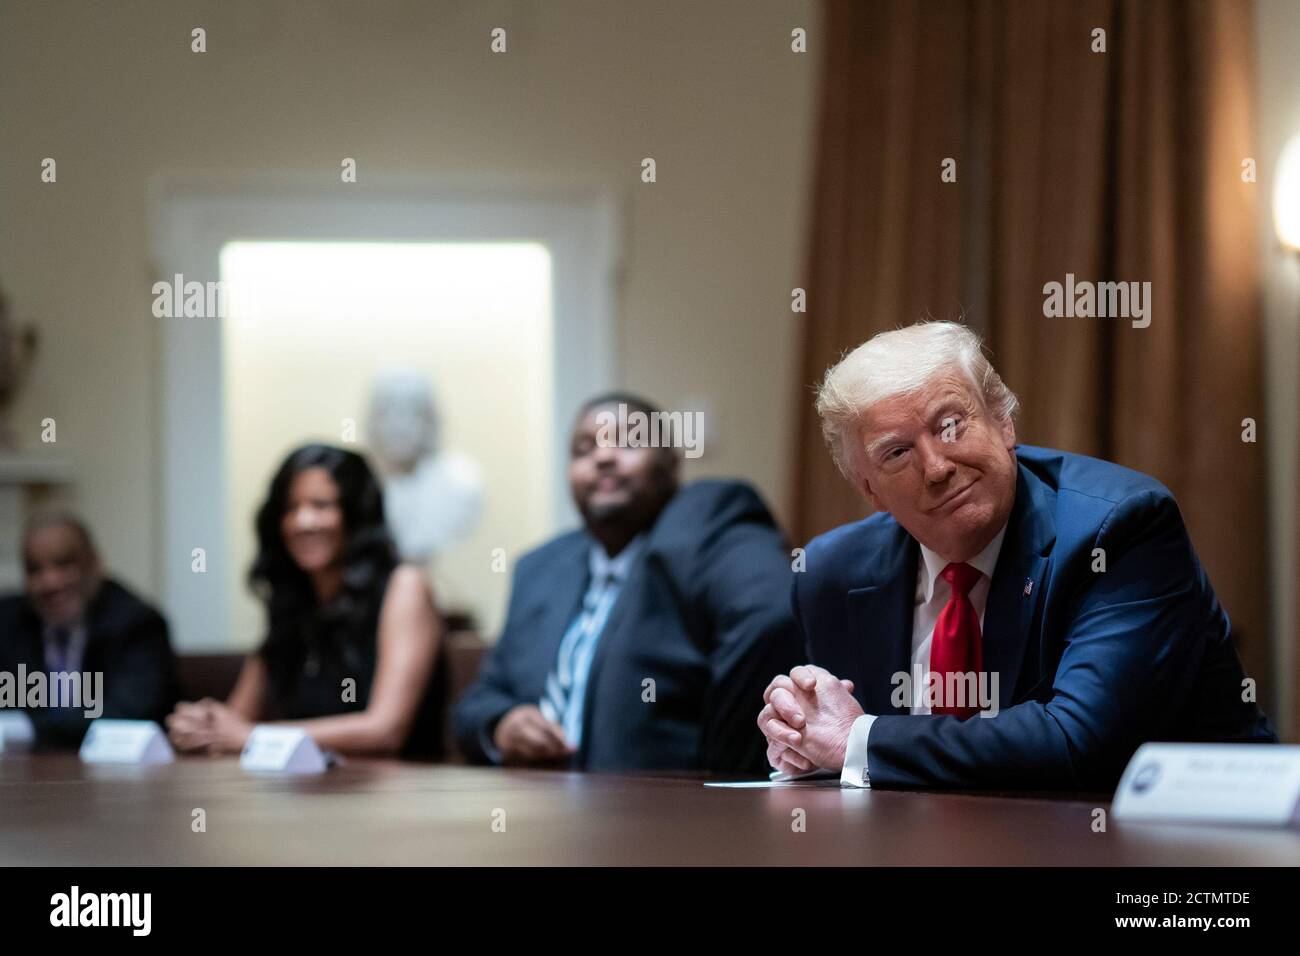 President Trump Participates in a Roundtable on Race Relations. President Donald J. Trump listens to participants address their remarks during a roundtable on race relations Wednesday, June 10, 2020, with prominent black leaders in the Cabinet Room of the White House. Stock Photo